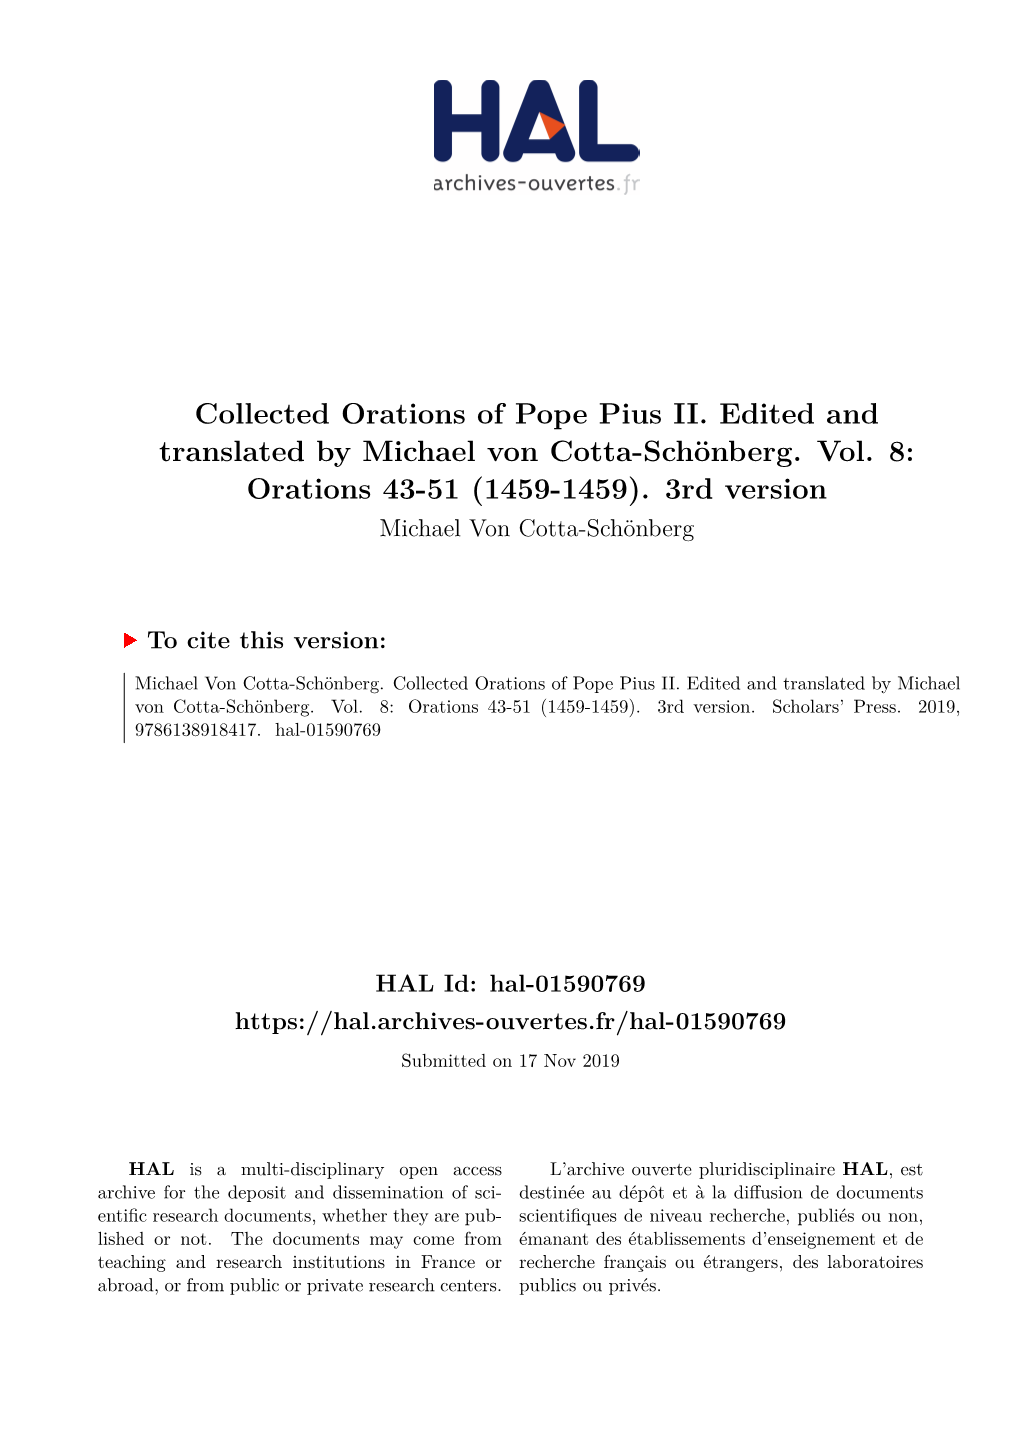 Collected Orations of Pope Pius II. Edited and Translated by Michael Von Cotta-Schönberg. Vol. 8: Orations 43-51 (1459-1459)